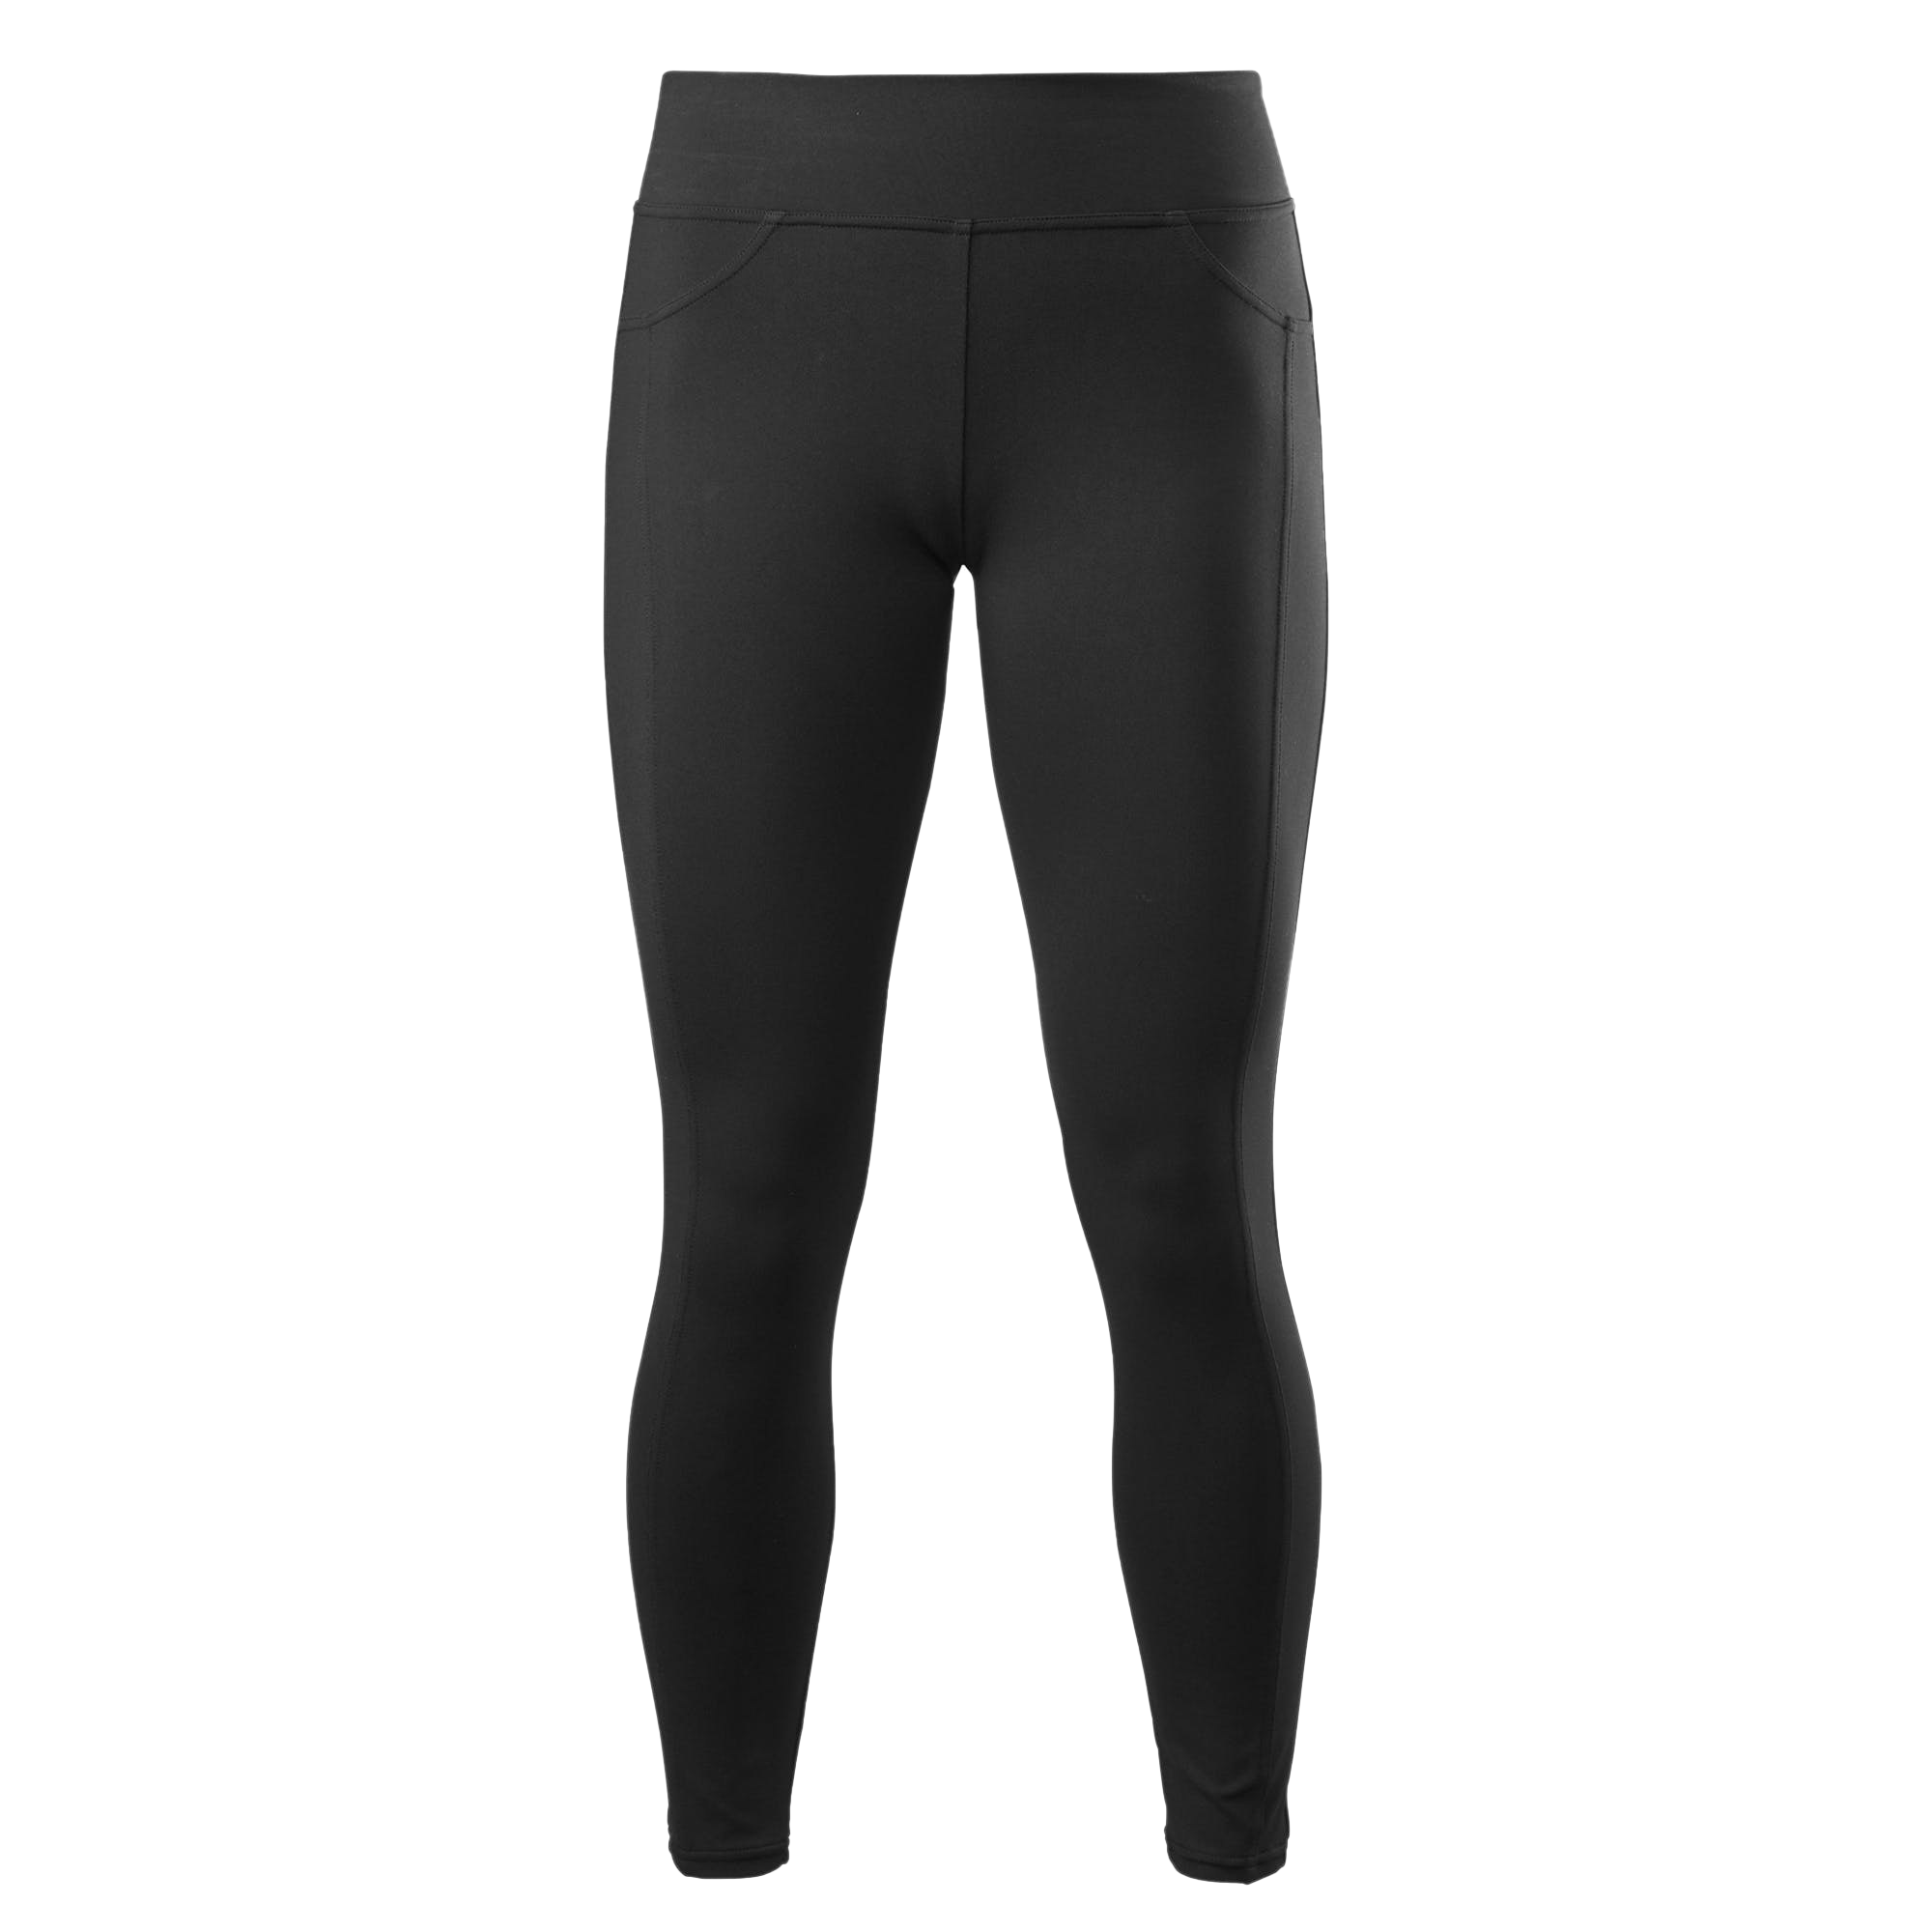 Leggings Clear Background Images